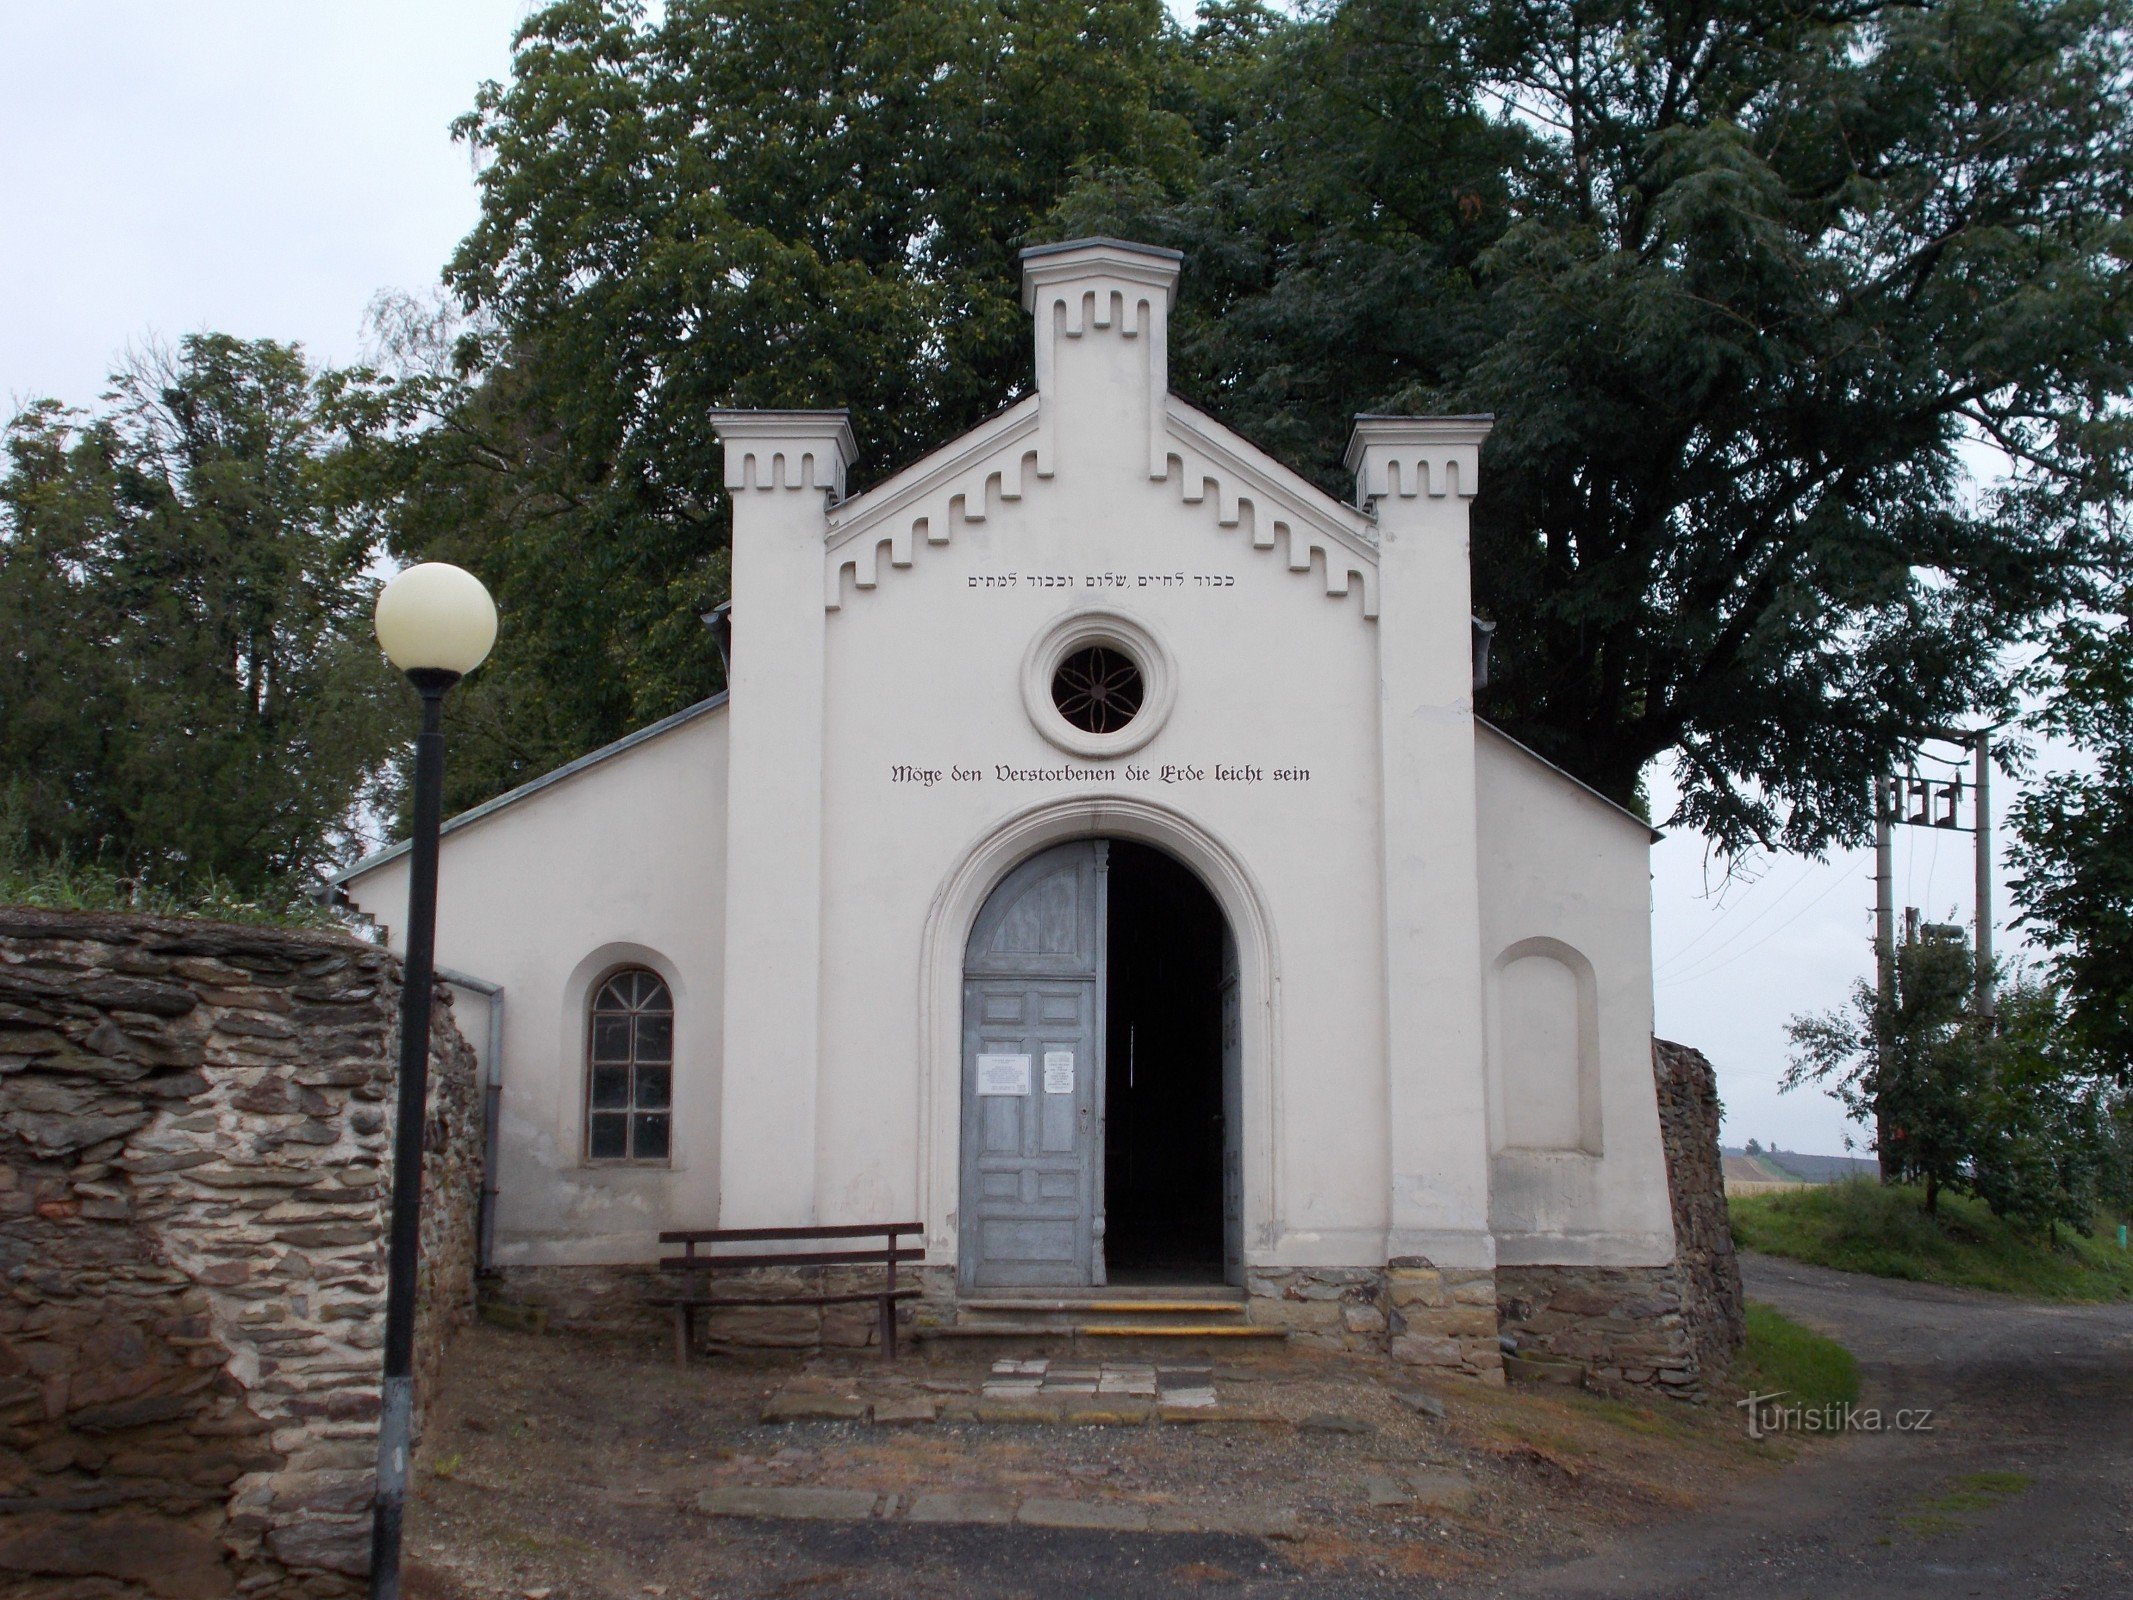 Entrance building of the cemetery